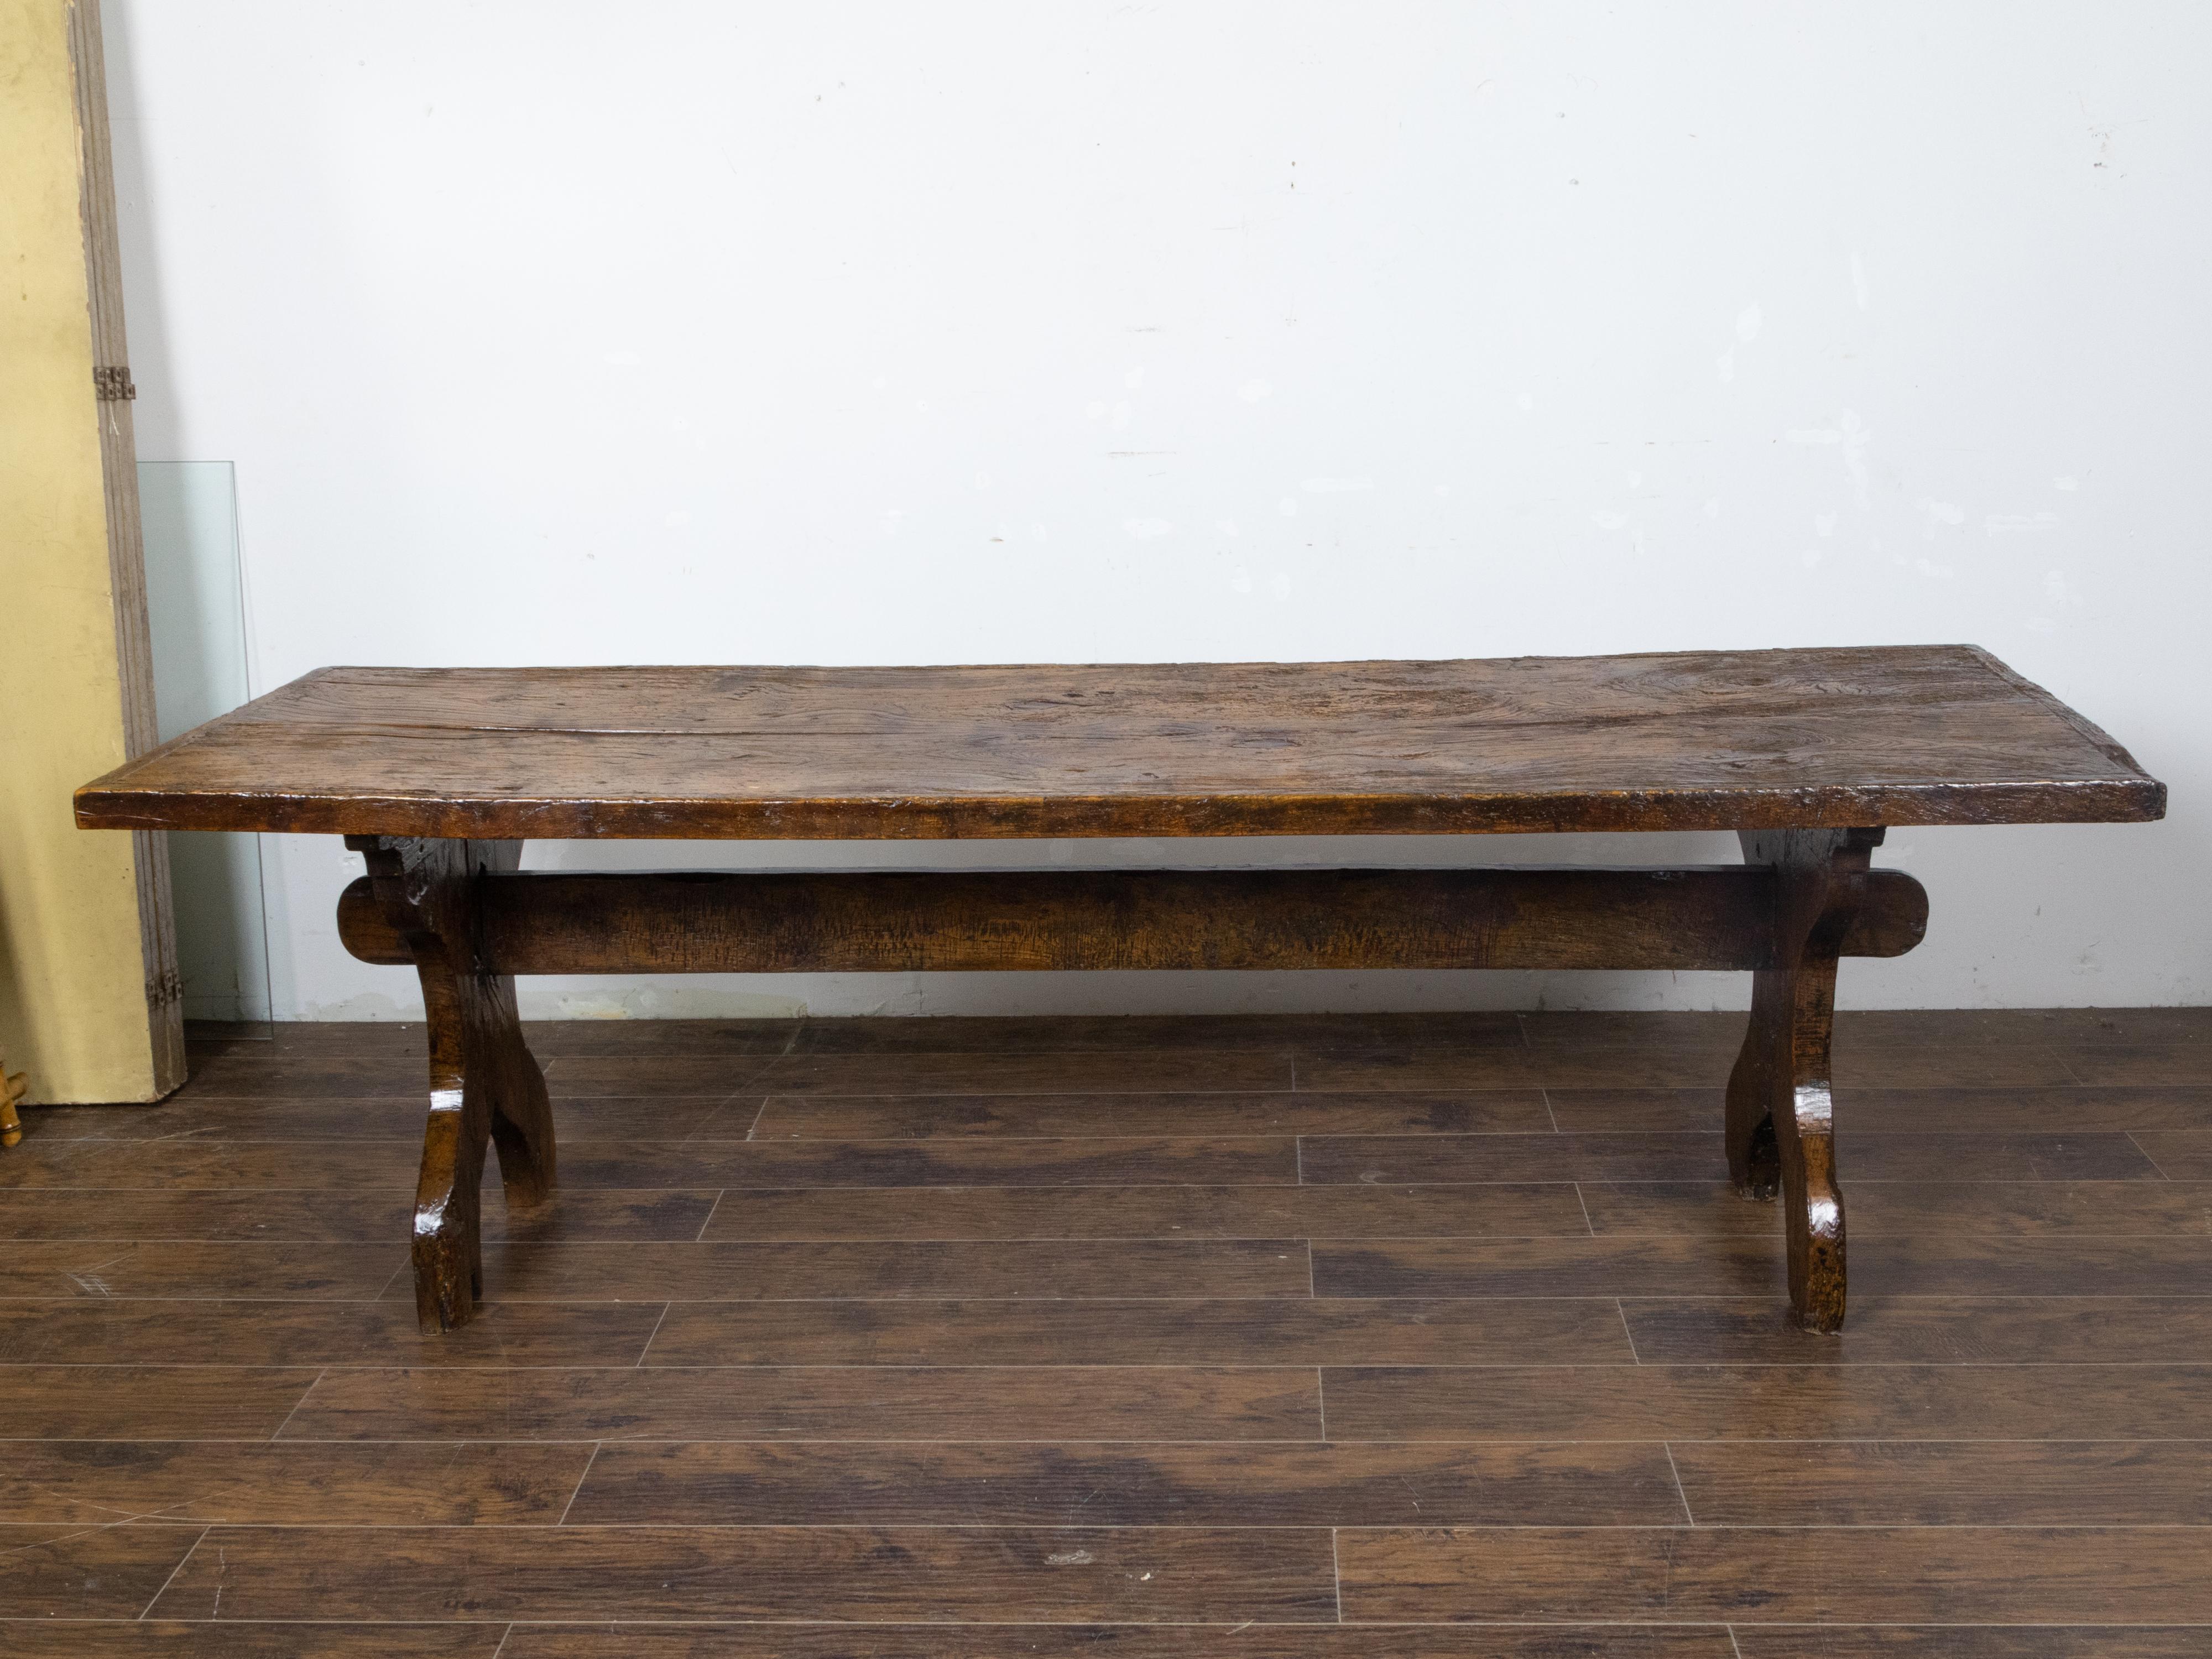 Italian 1800s Walnut Farm Table with Carved Legs, Stretcher and Weathered Patina In Good Condition For Sale In Atlanta, GA